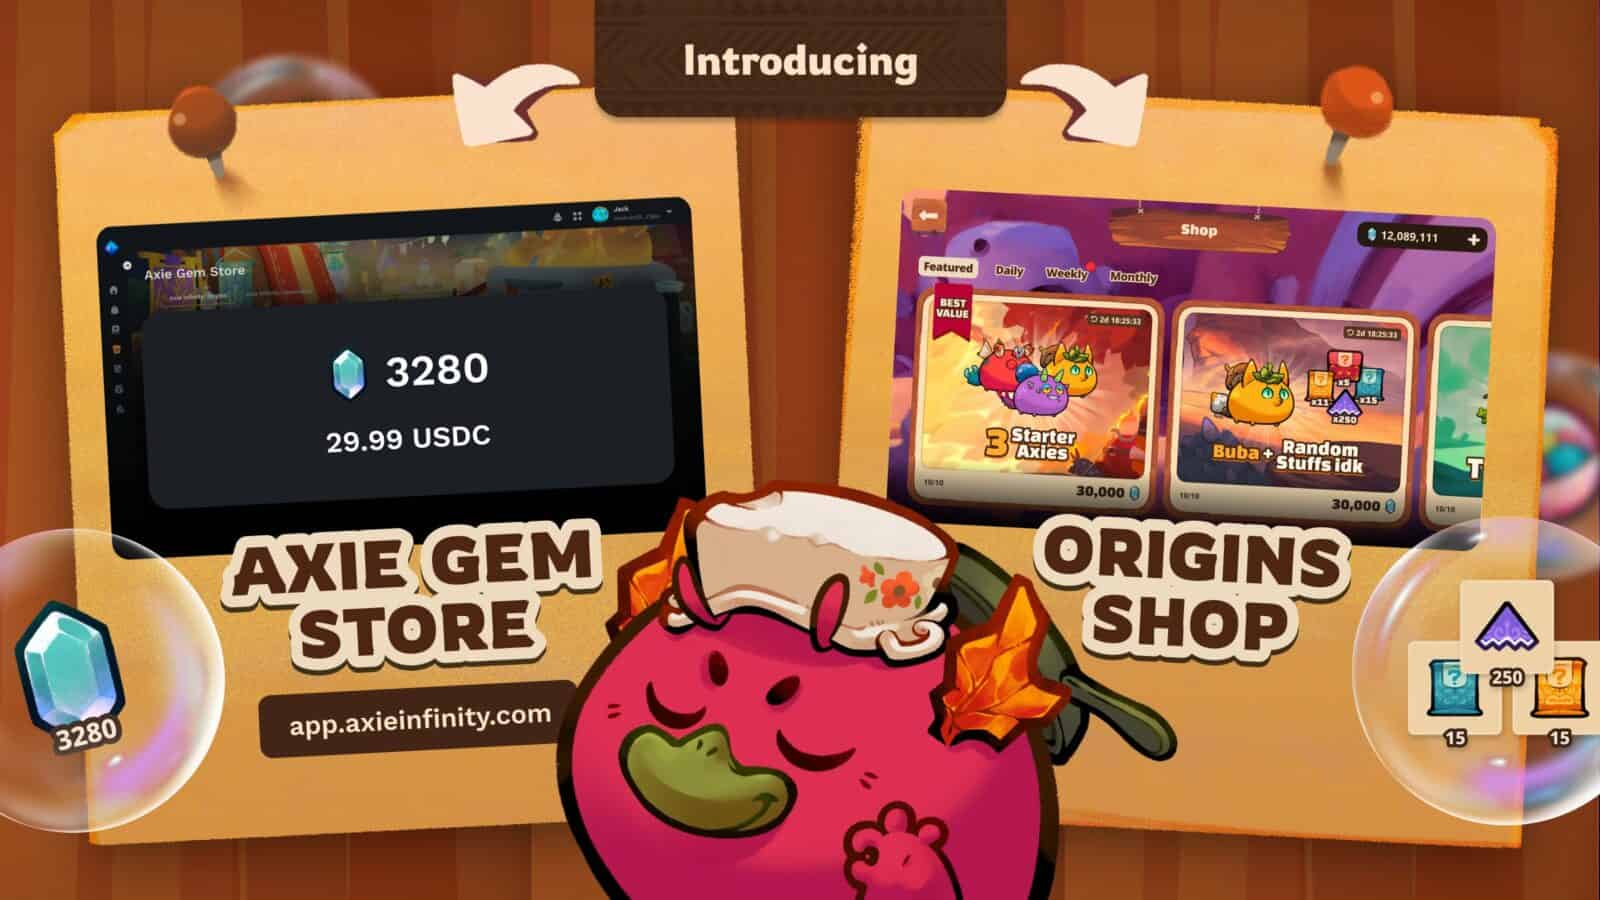 Axie Infinity Launches Origins Shop and Gem Store